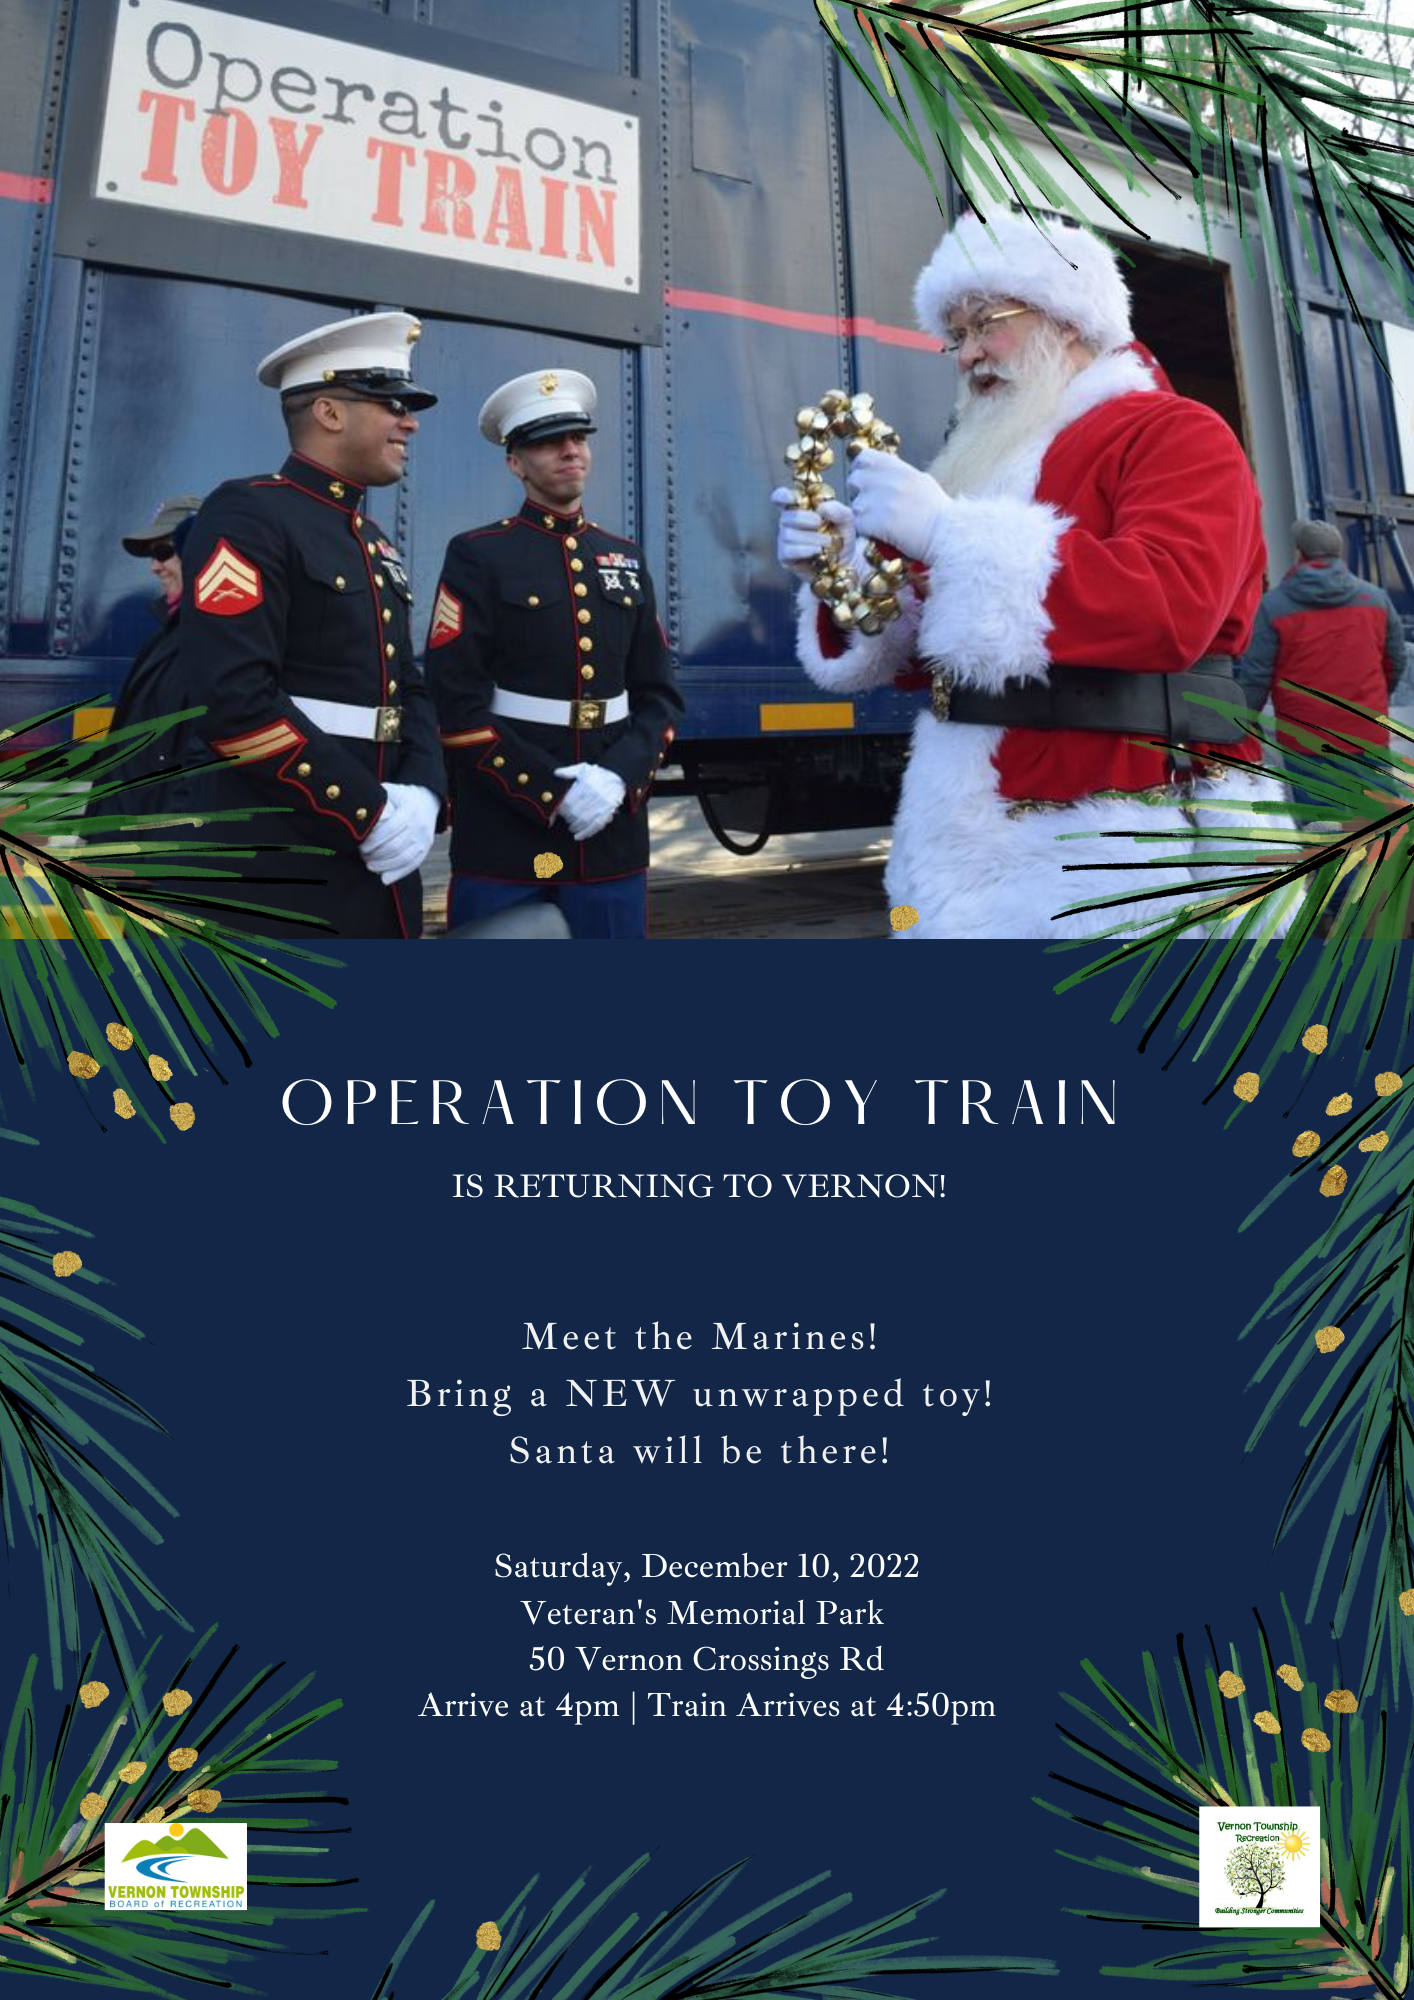 Operation Toy Train Flyer 2